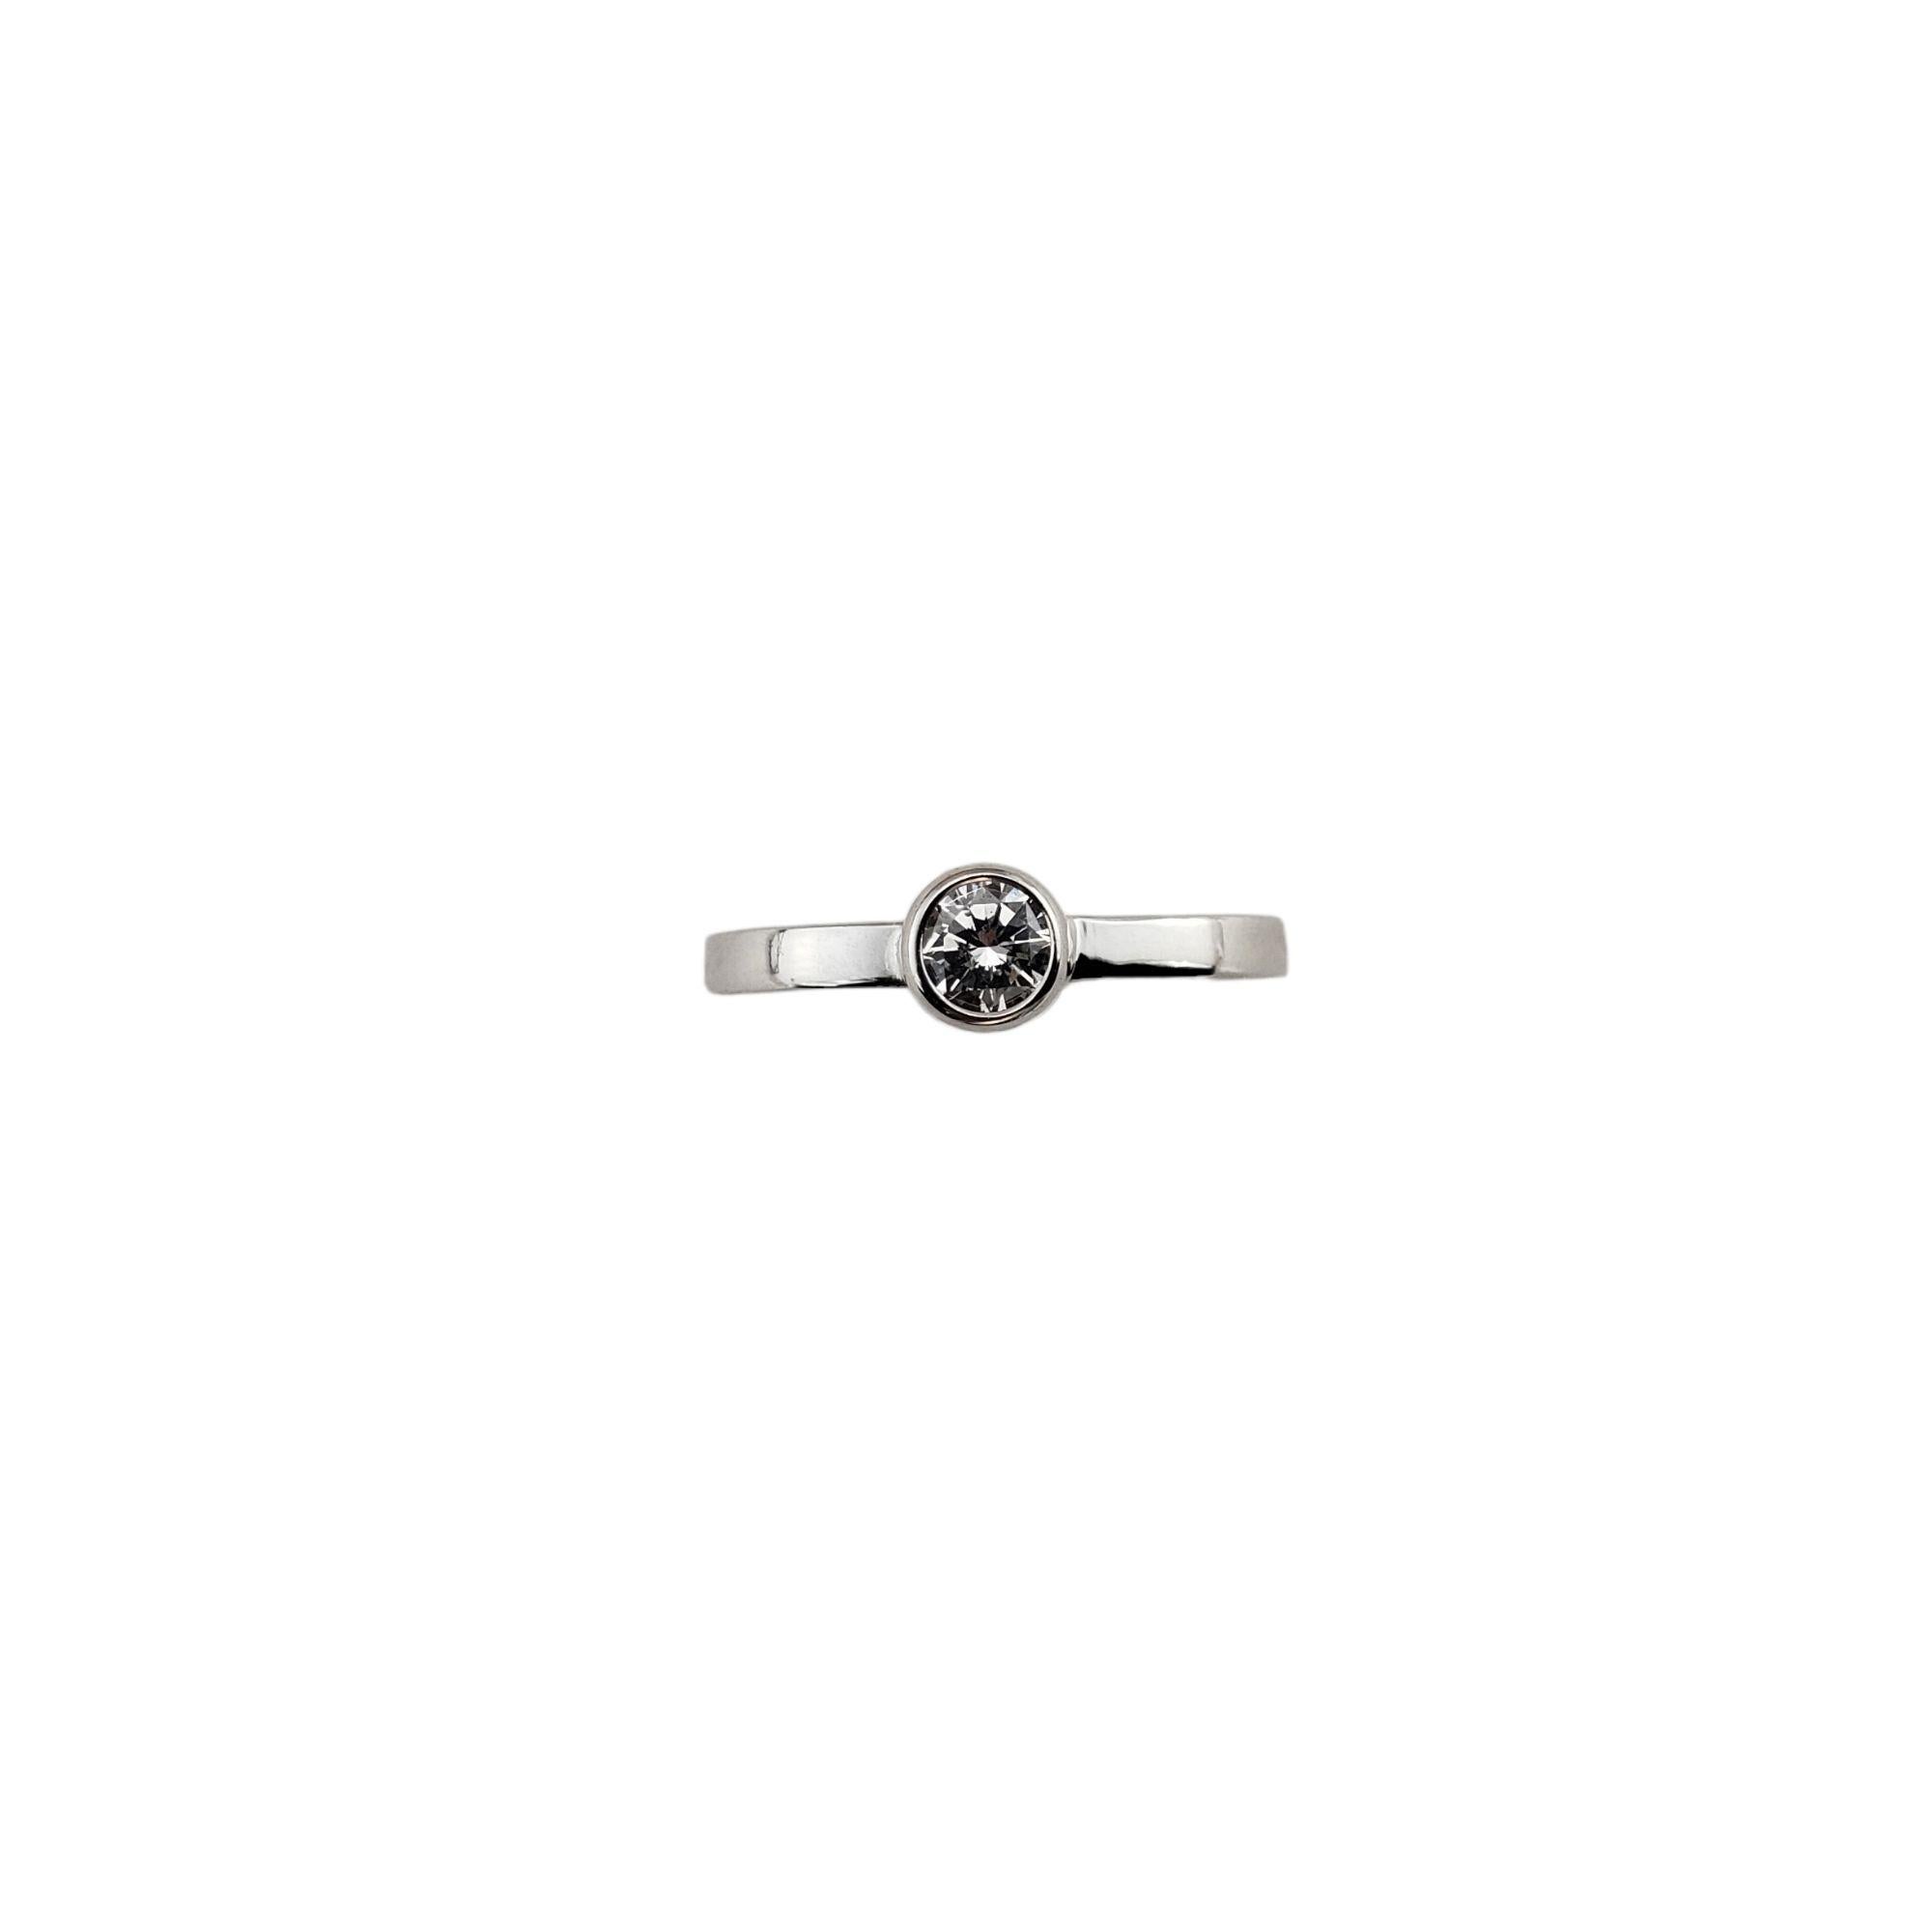 Vintage 14 Karat White Gold and Diamond Ring Size 6.5-

This elegant ring features one round brilliant cut diamond set in classic 14K white gold. Width: 5 mm. Shank: 2 mm.

Approximate total diamond weight: .25 ct.

Diamond clarity: SI1

Diamond